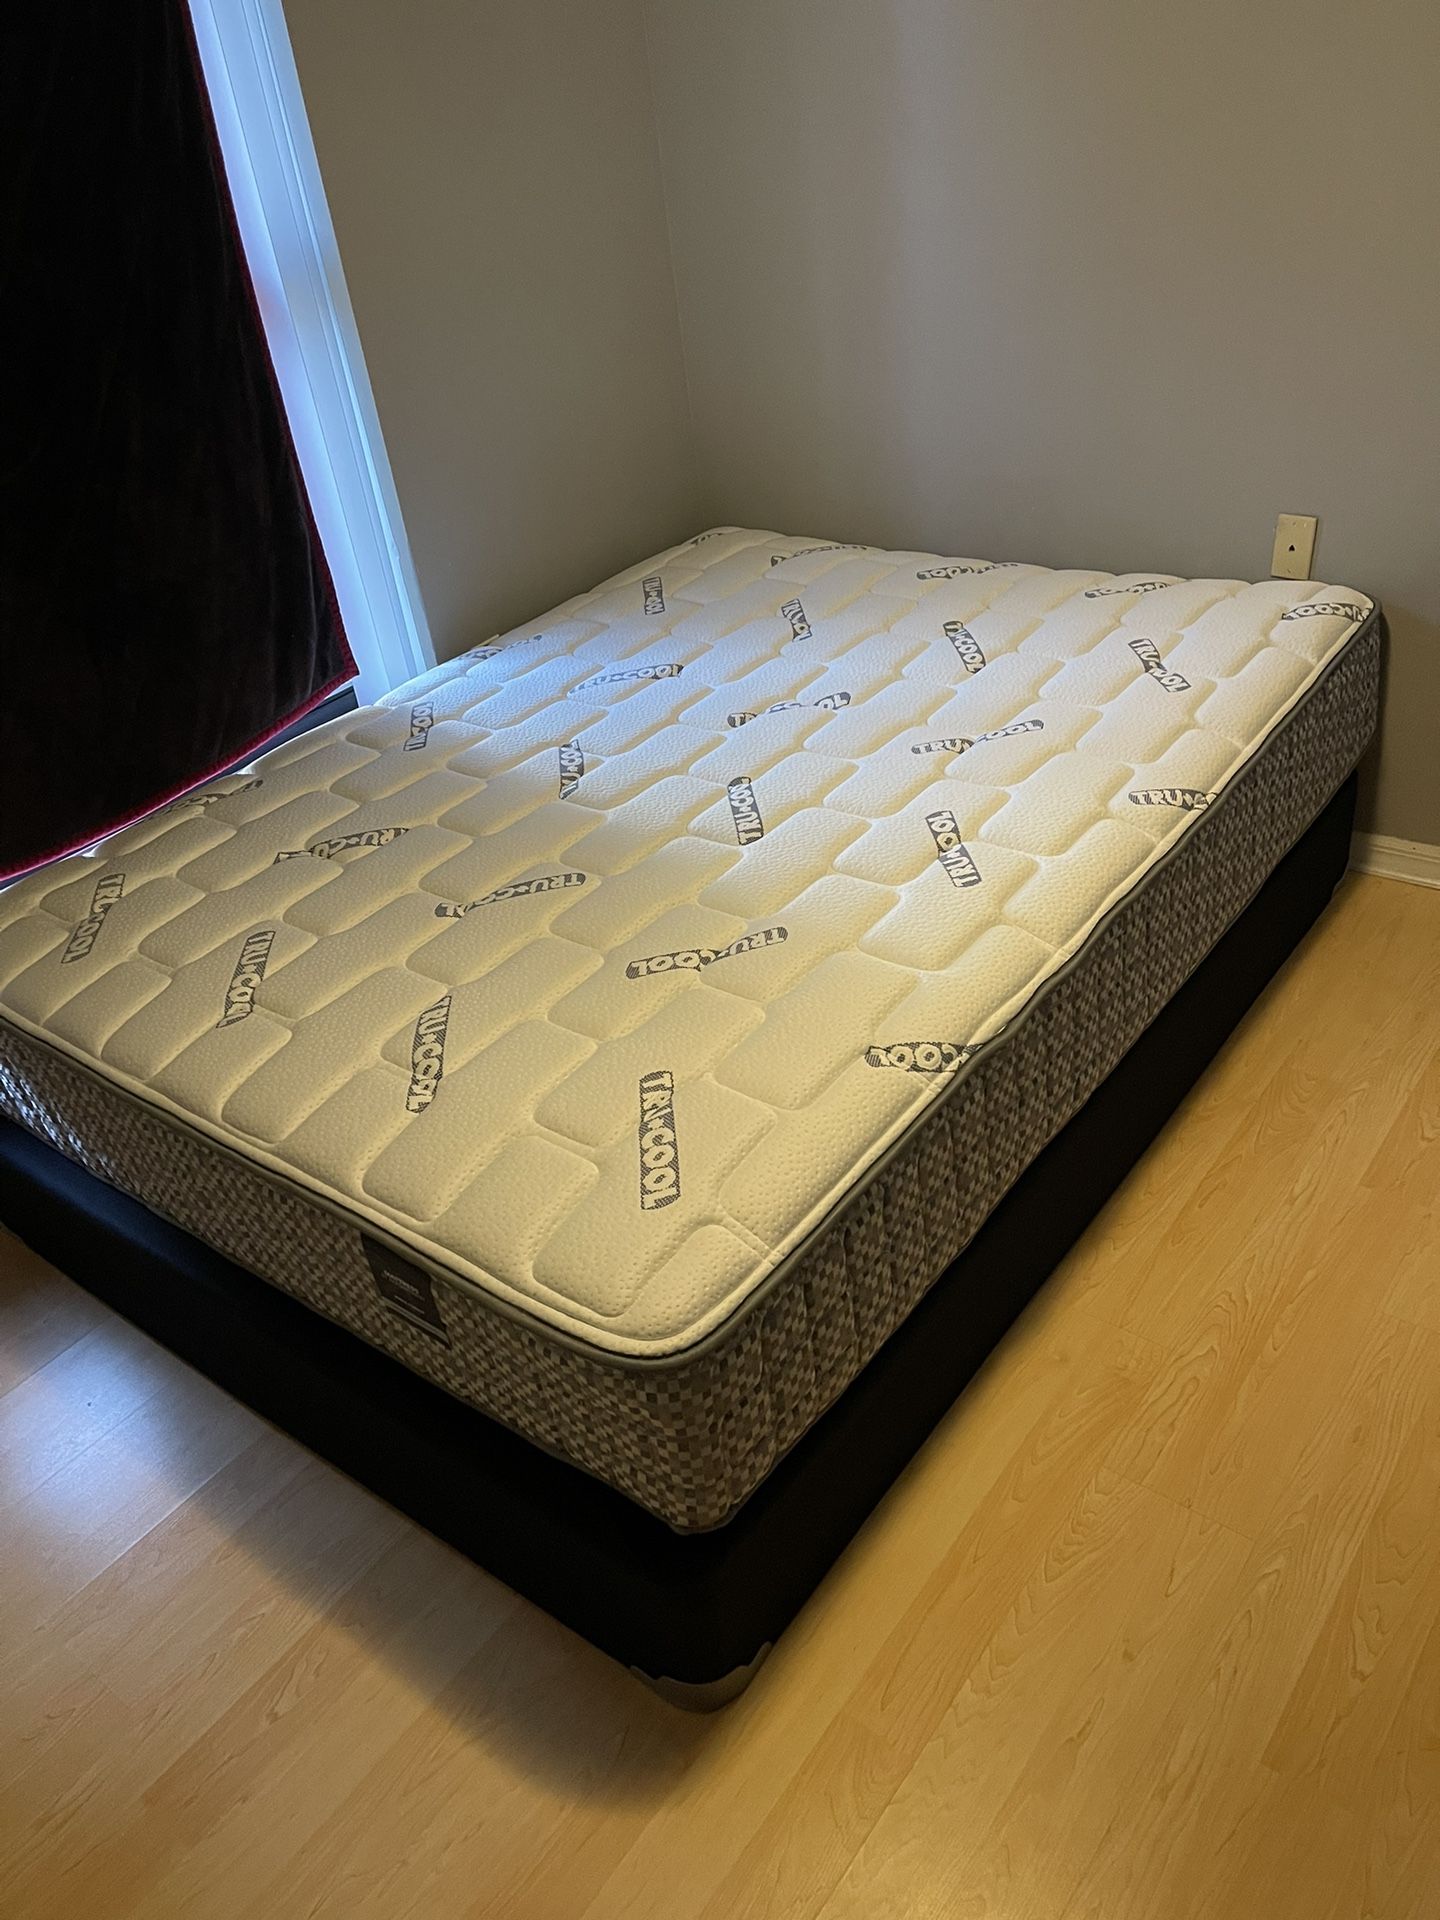 Tru Cool Orthopedic Extra Firm Mattresses Available Now! $40 Down!